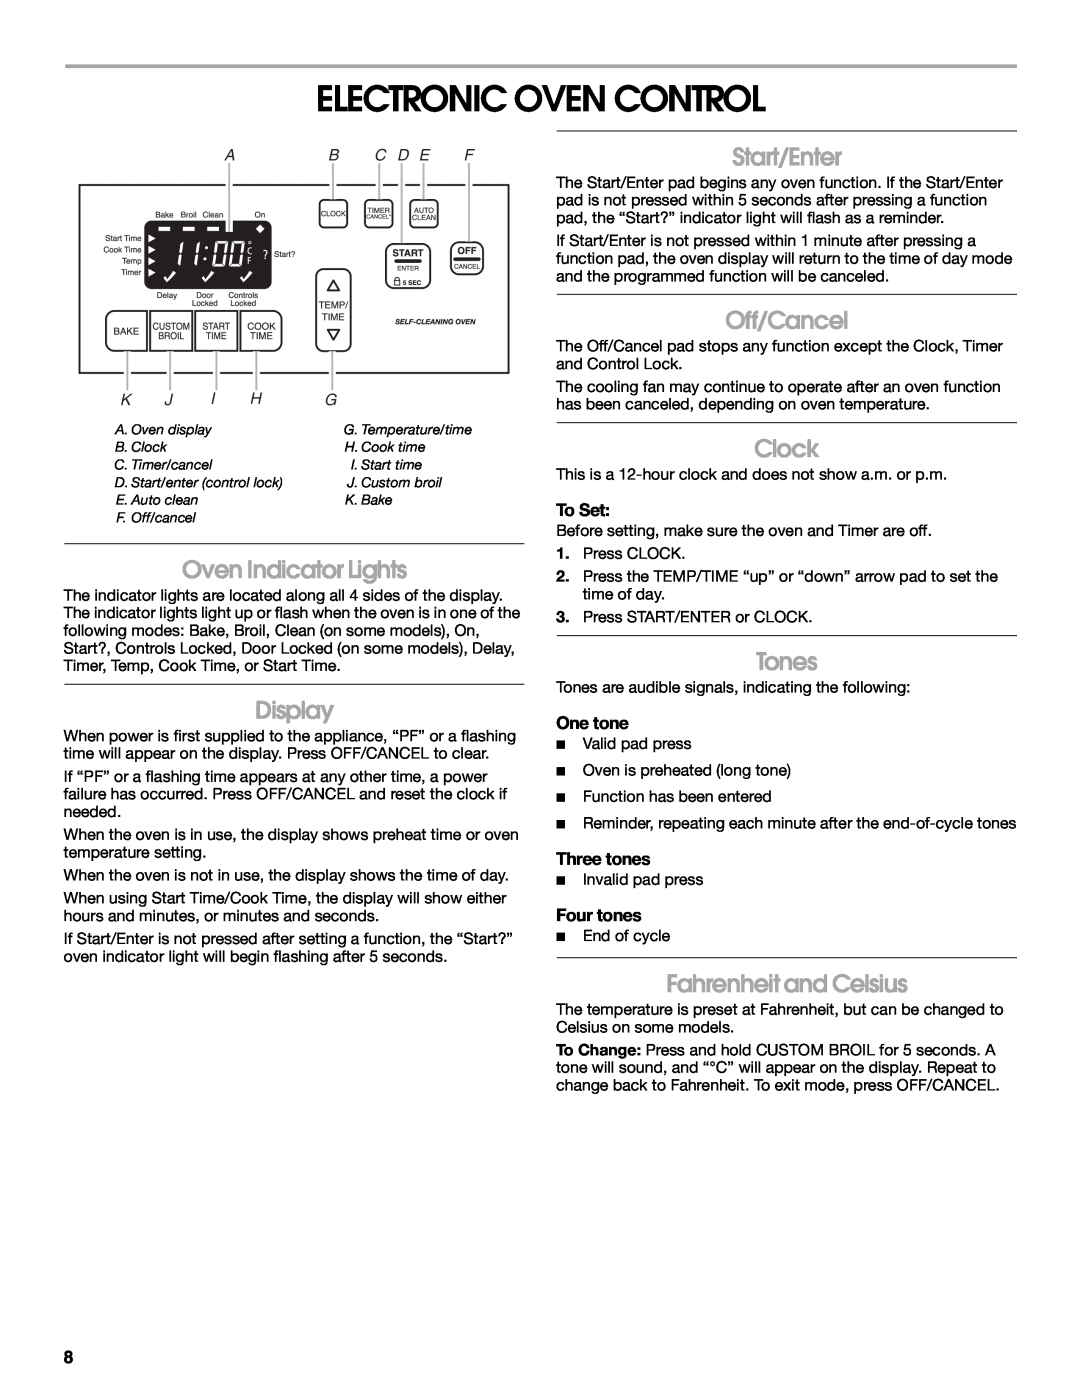 Whirlpool W10017570 Electronic Oven Control, Oven Indicator Lights, Display, Start/Enter, Off/Cancel, Clock, Tones, To Set 